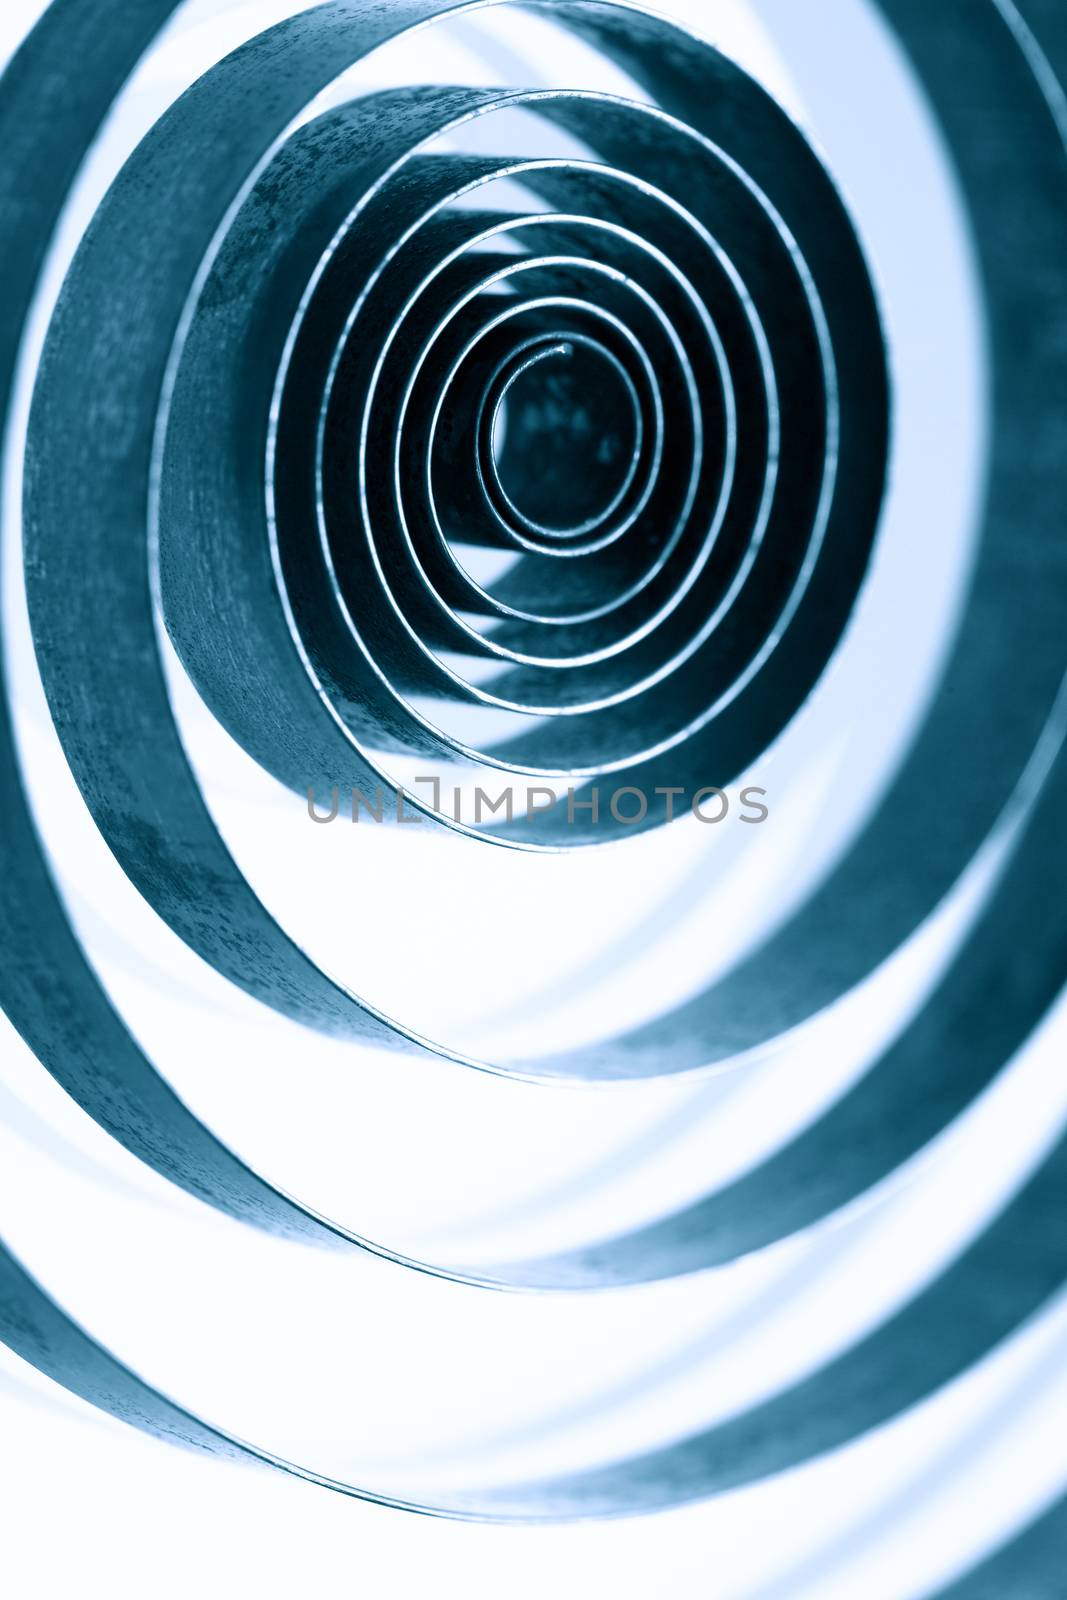 Industrial background. Closeup of old metal spiral on white background